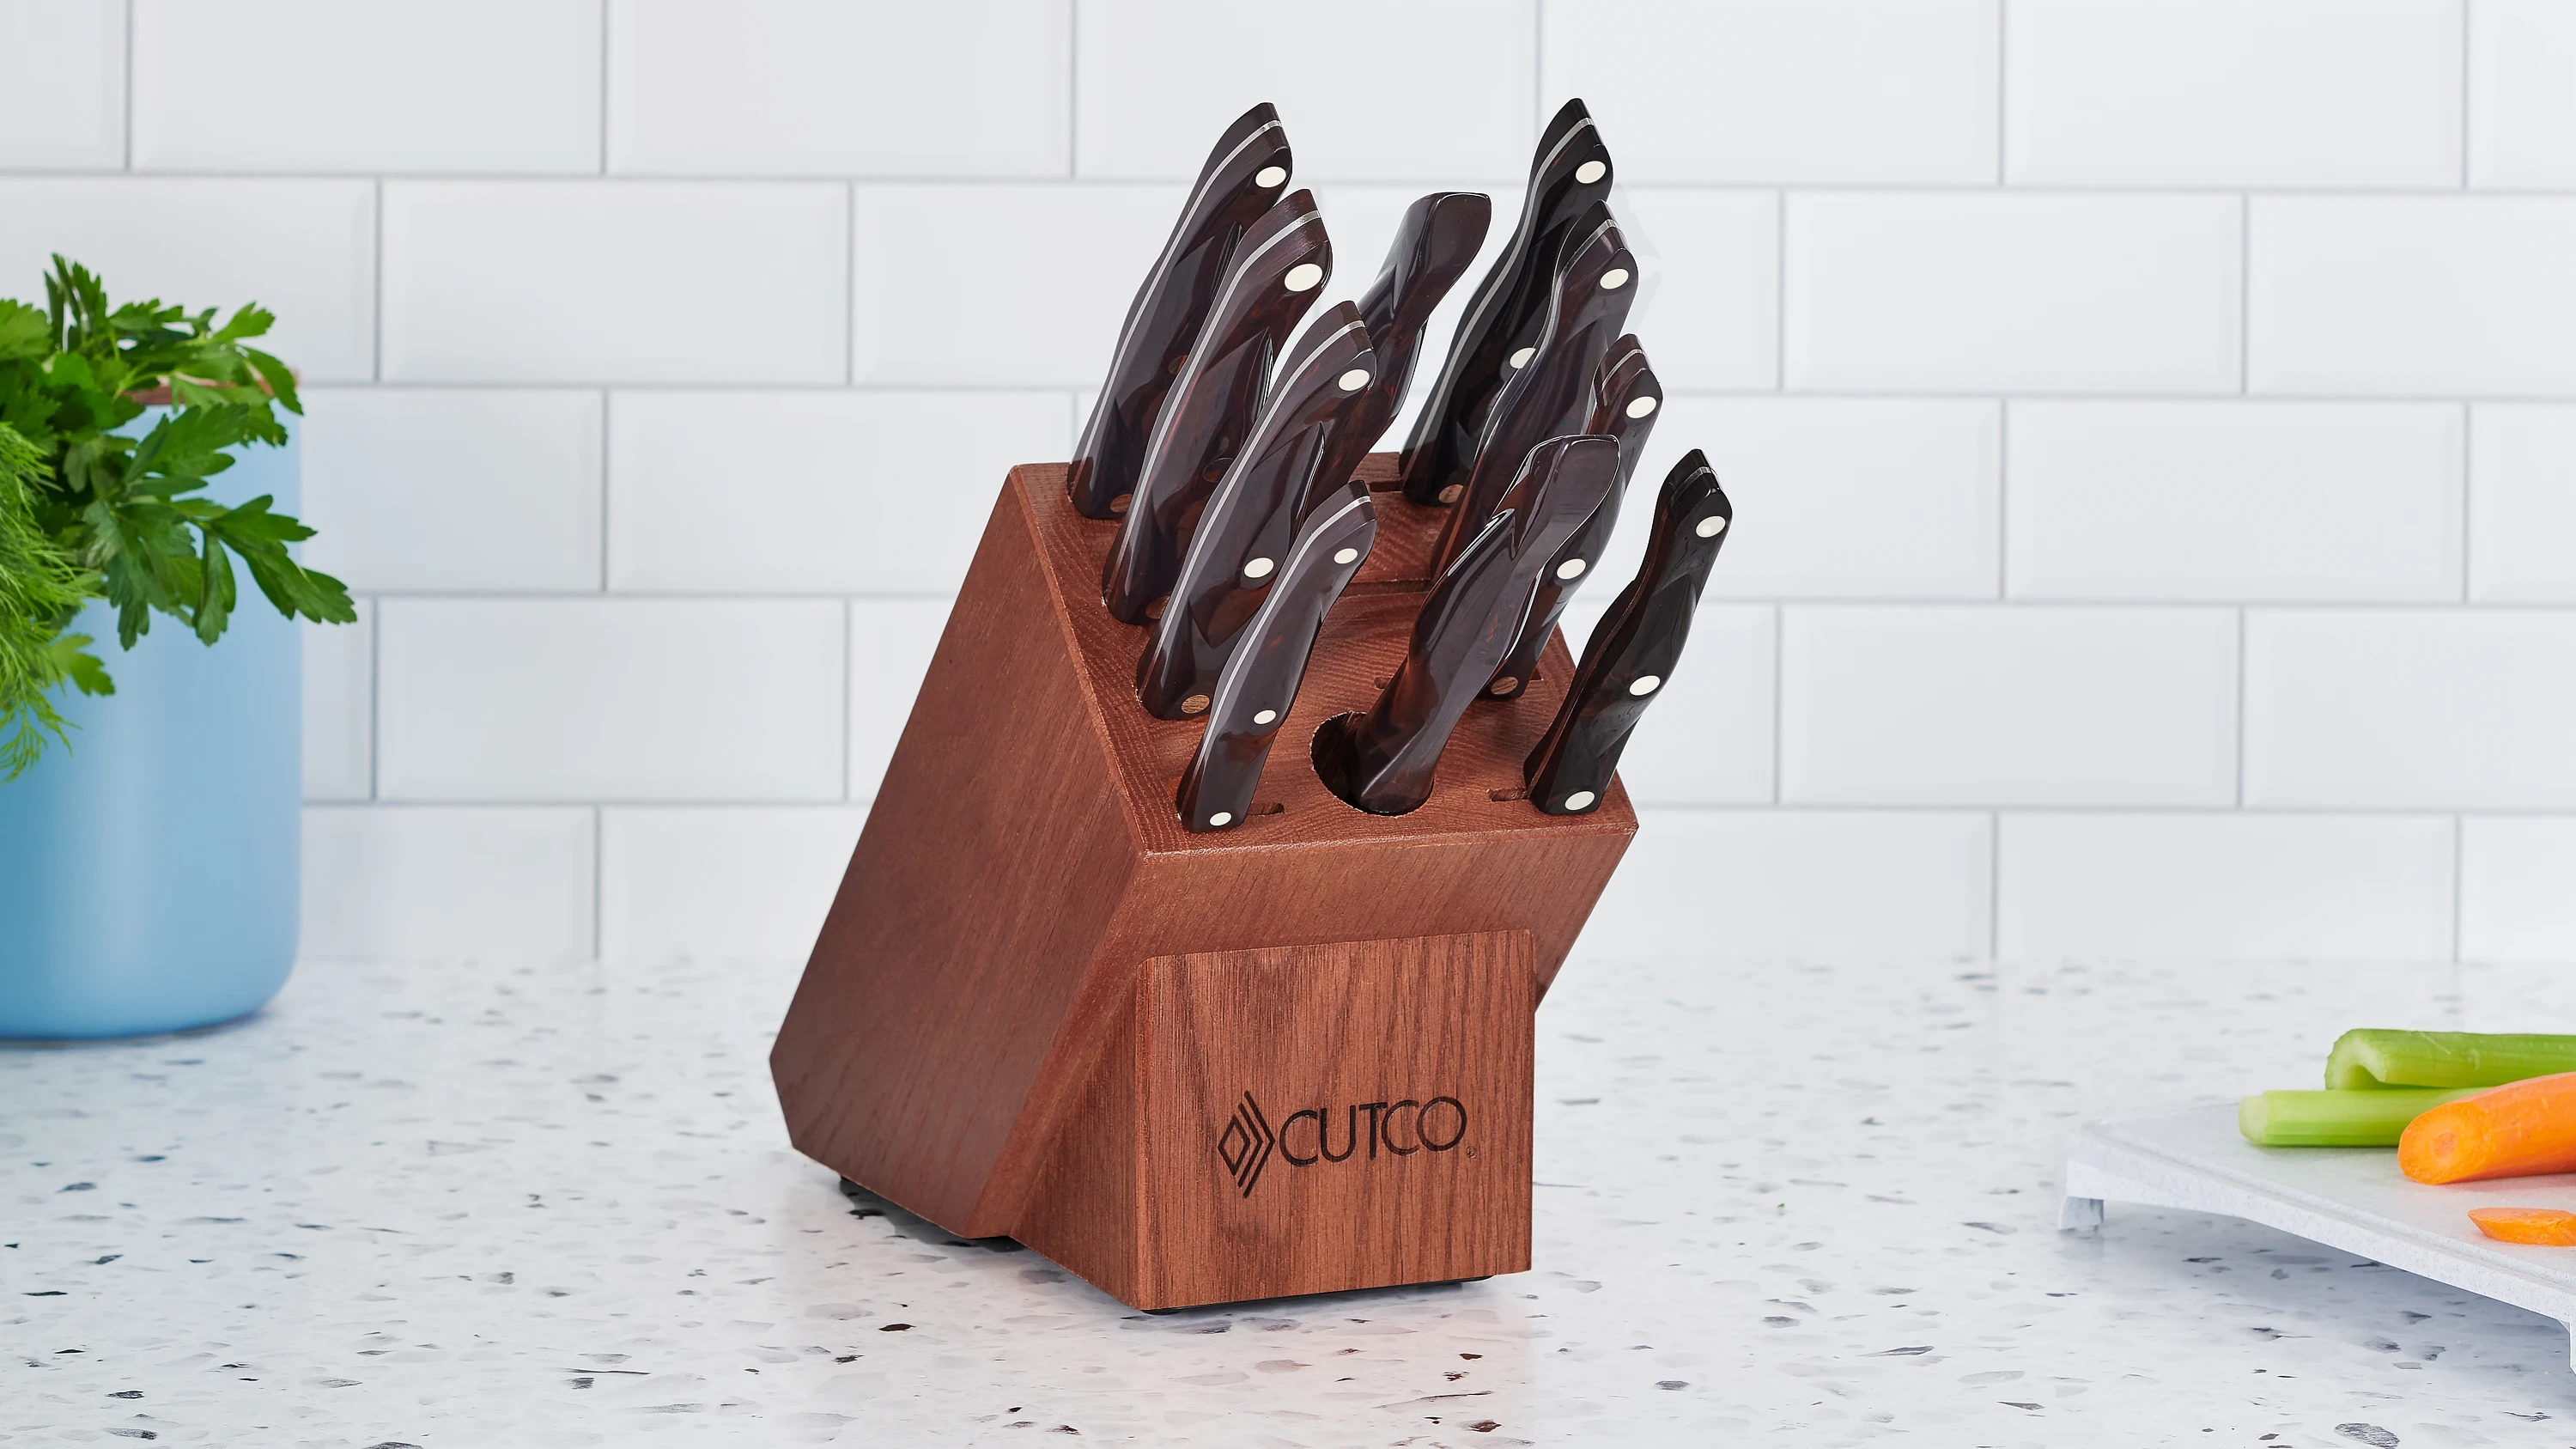 Knife Sets with a Block by Cutco